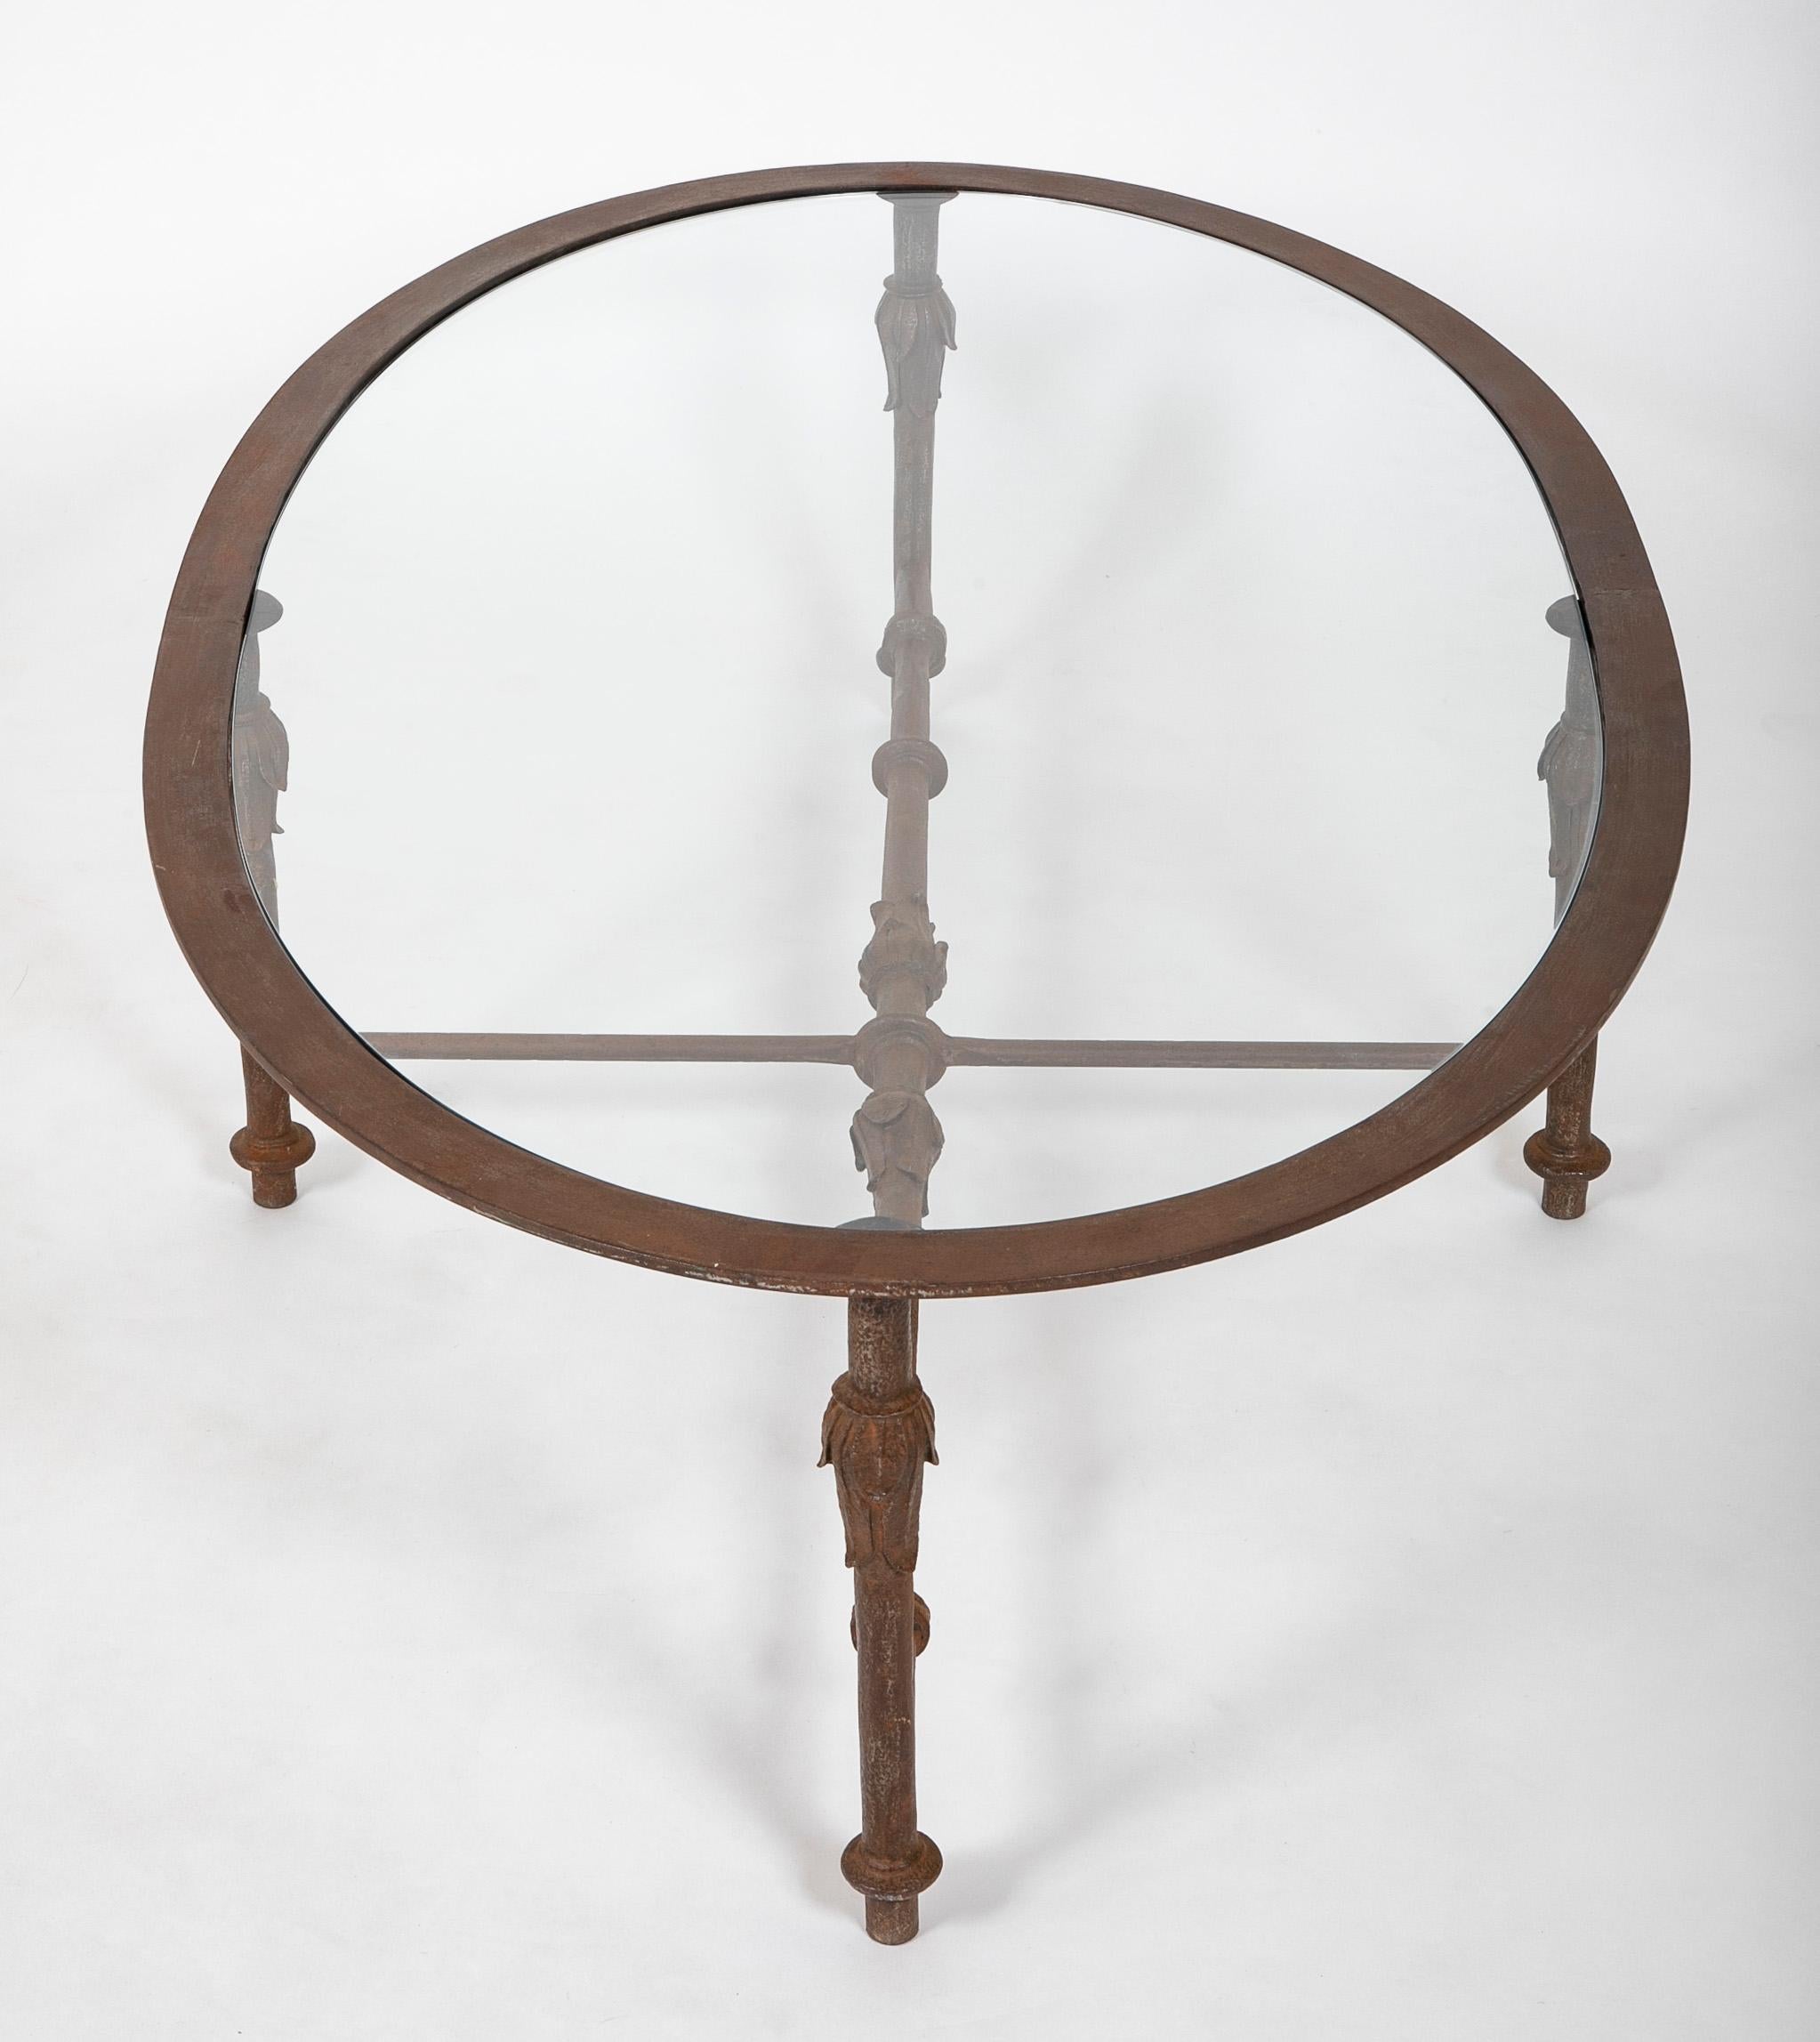 Italian Mid 20th Century Iron Oval Glass Topped Coffee Table For Sale